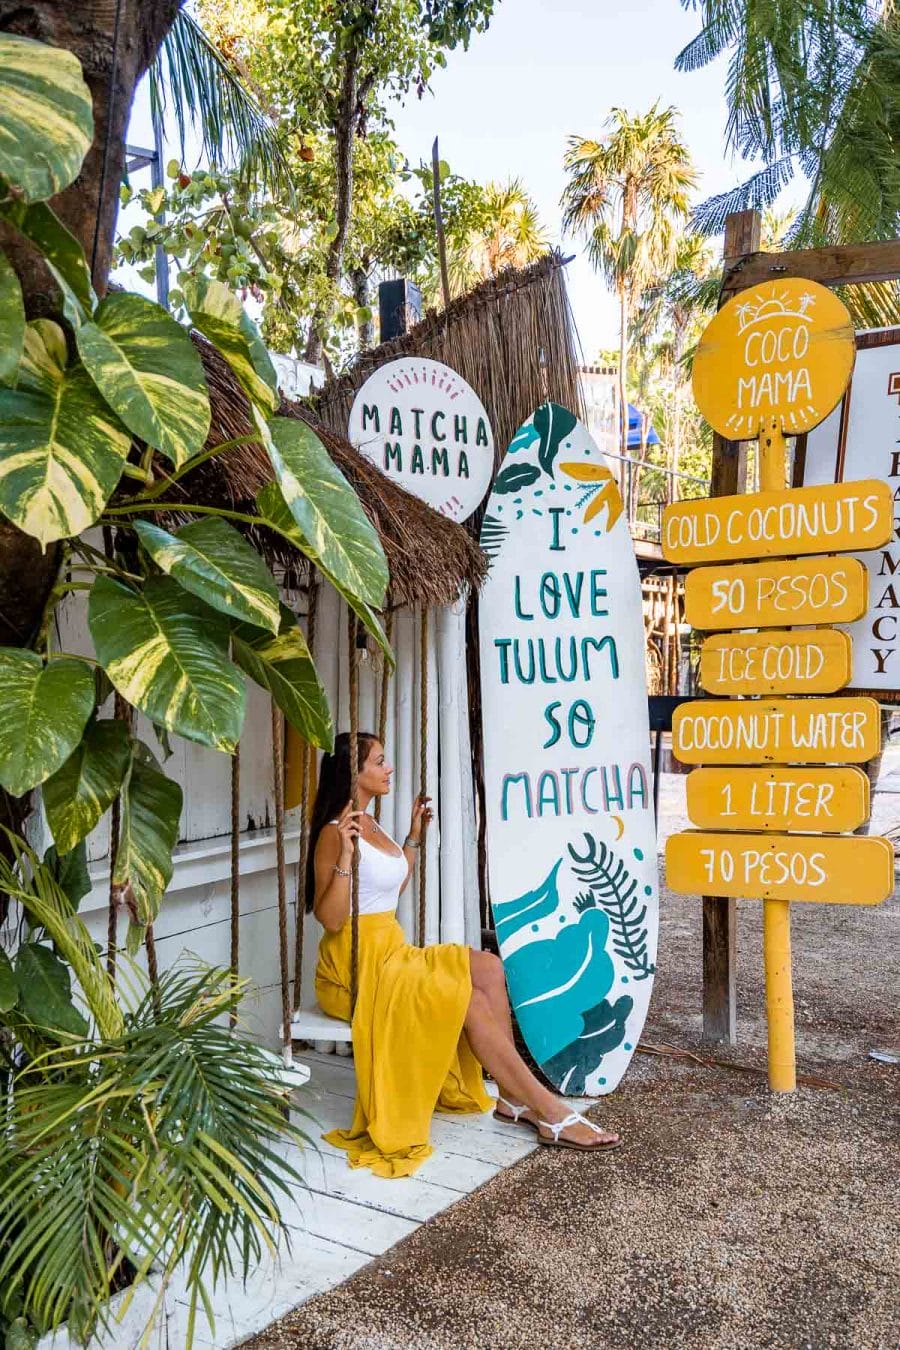 Girl in yellow skirt sitting on a swing at Matcha Mama Tulum, one of the most Instagrammable places in Tulum